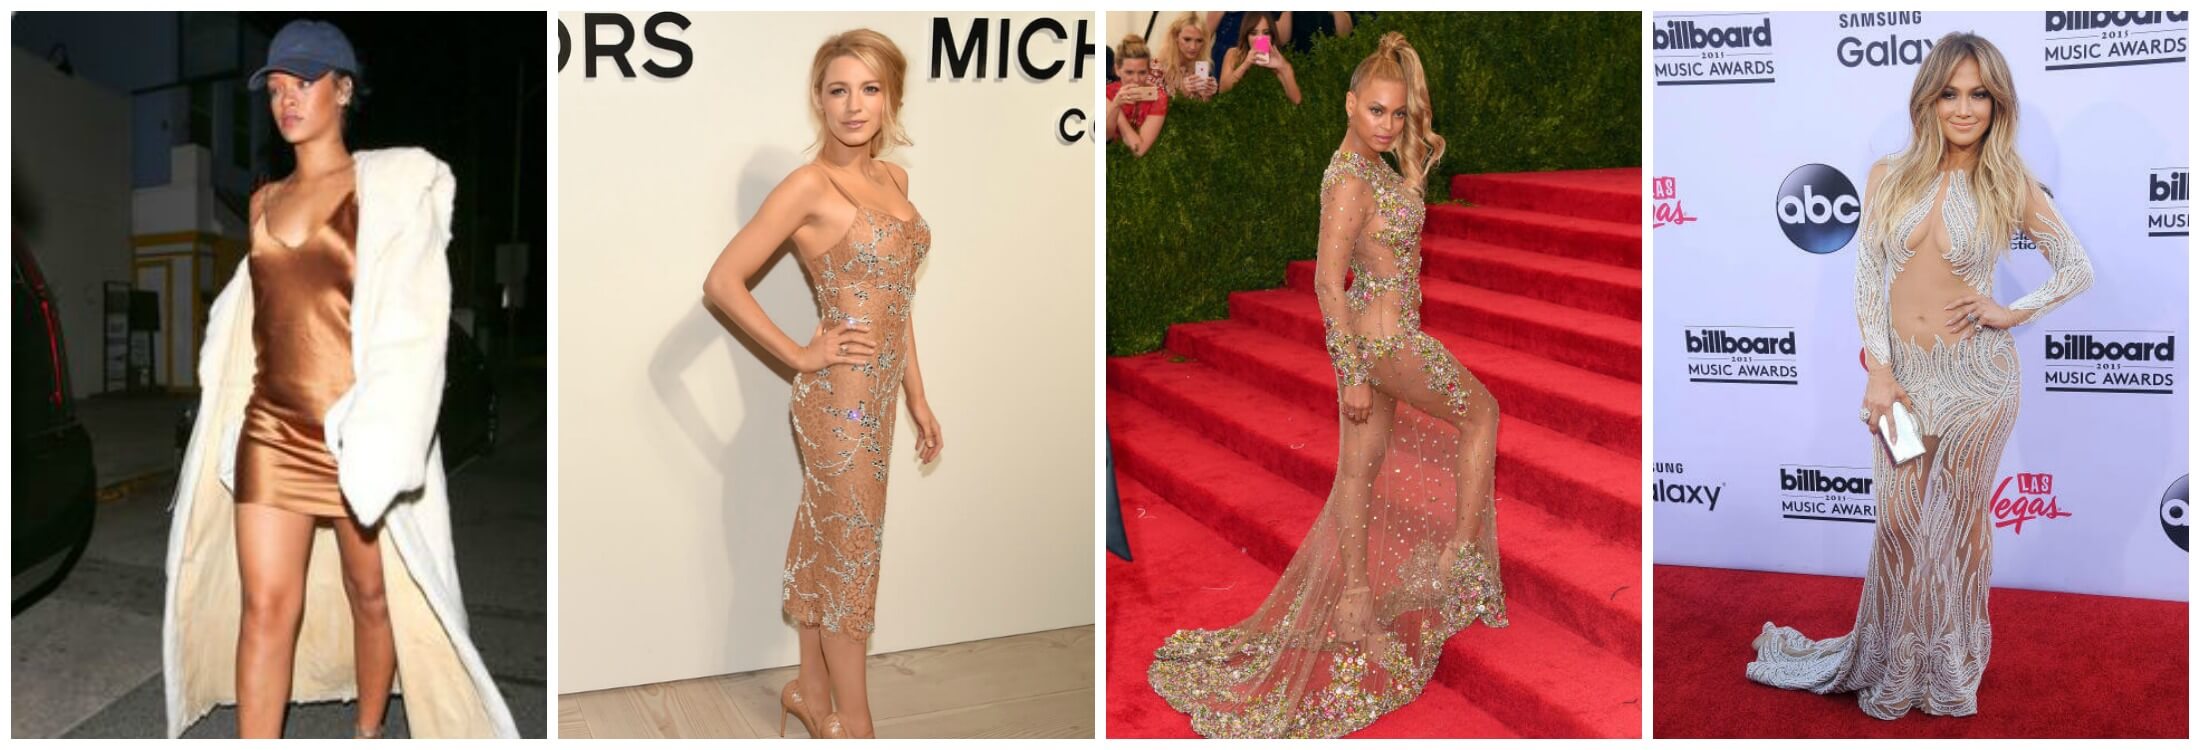 The Classic Naked Dress with Modern Twists & The New Naked Dress. From left: Rihanna, Blake Lively, Beyonce, Jennifer Lopez.